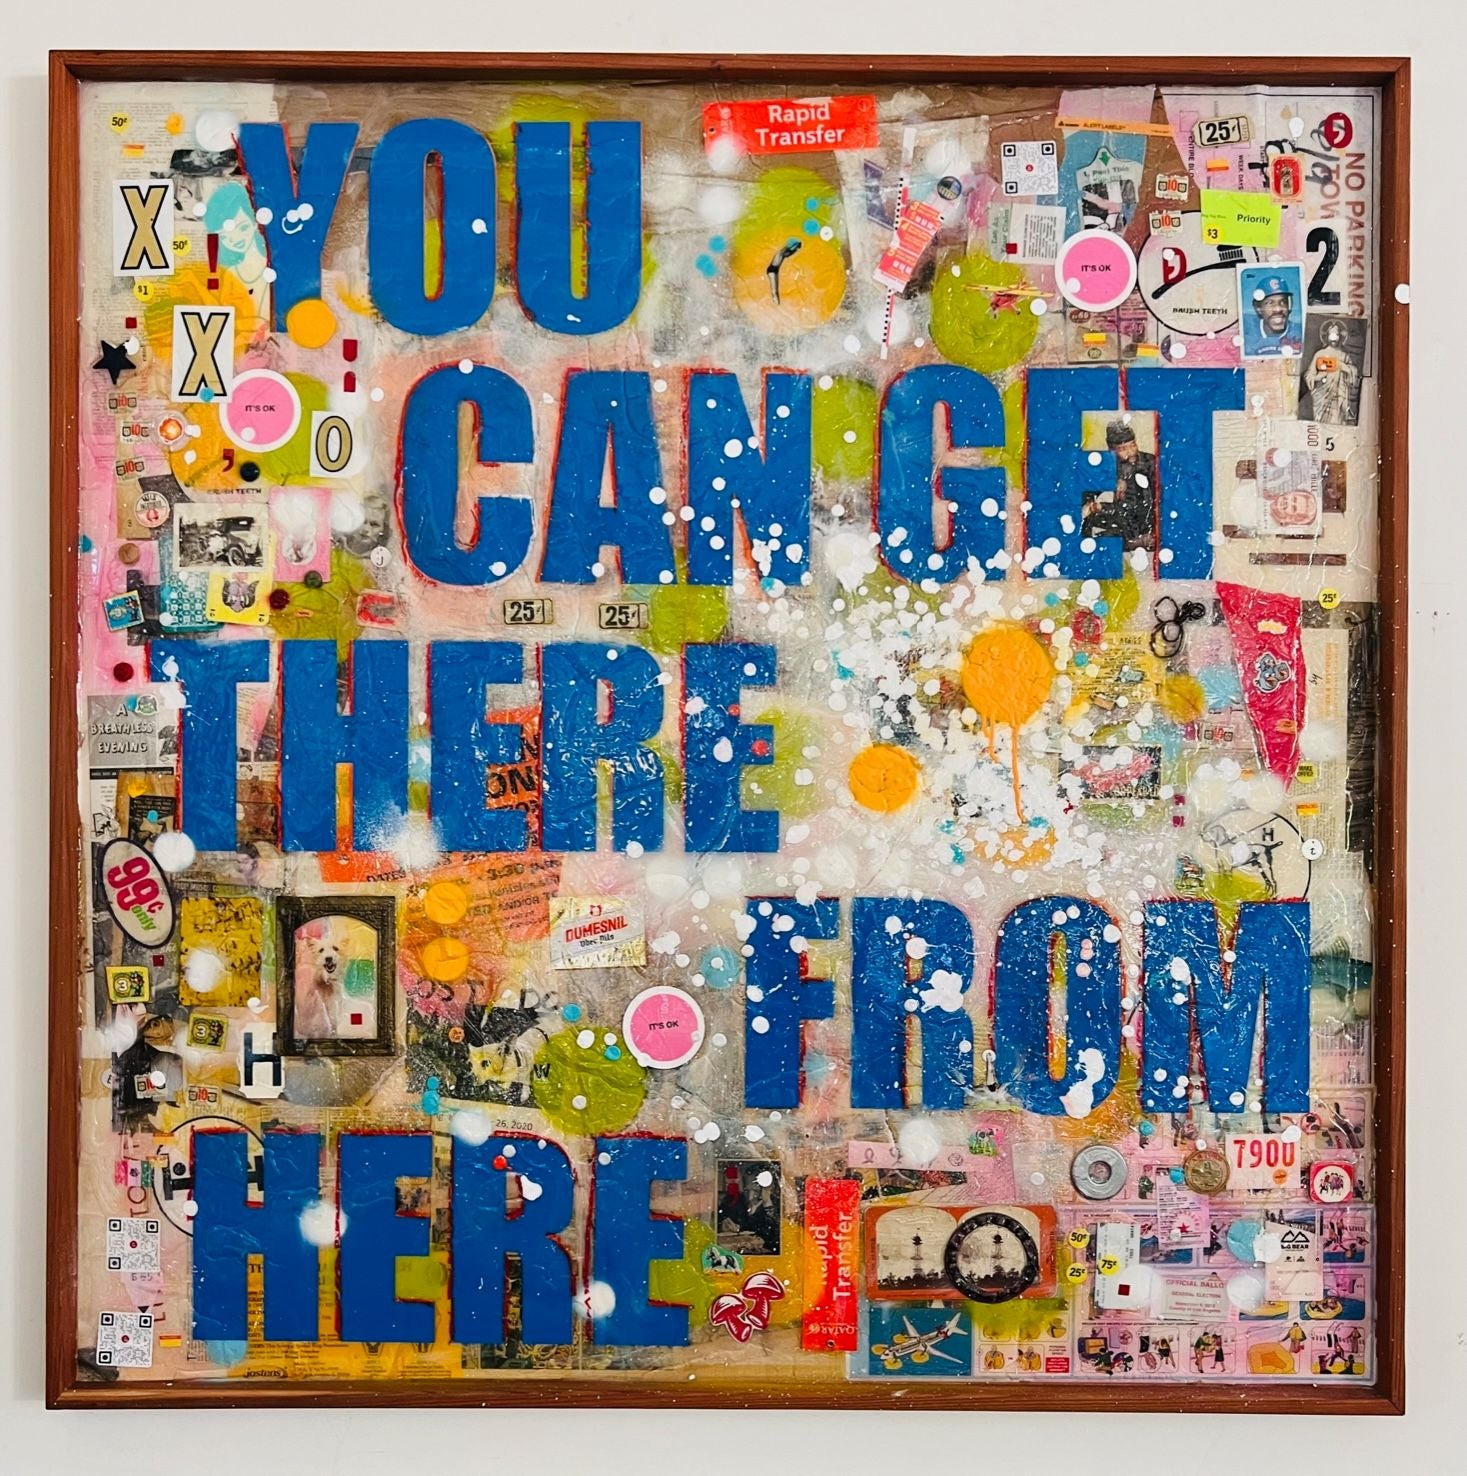 Joe Forte, “YOU CAN GET THERE FROM HERE” SOLD